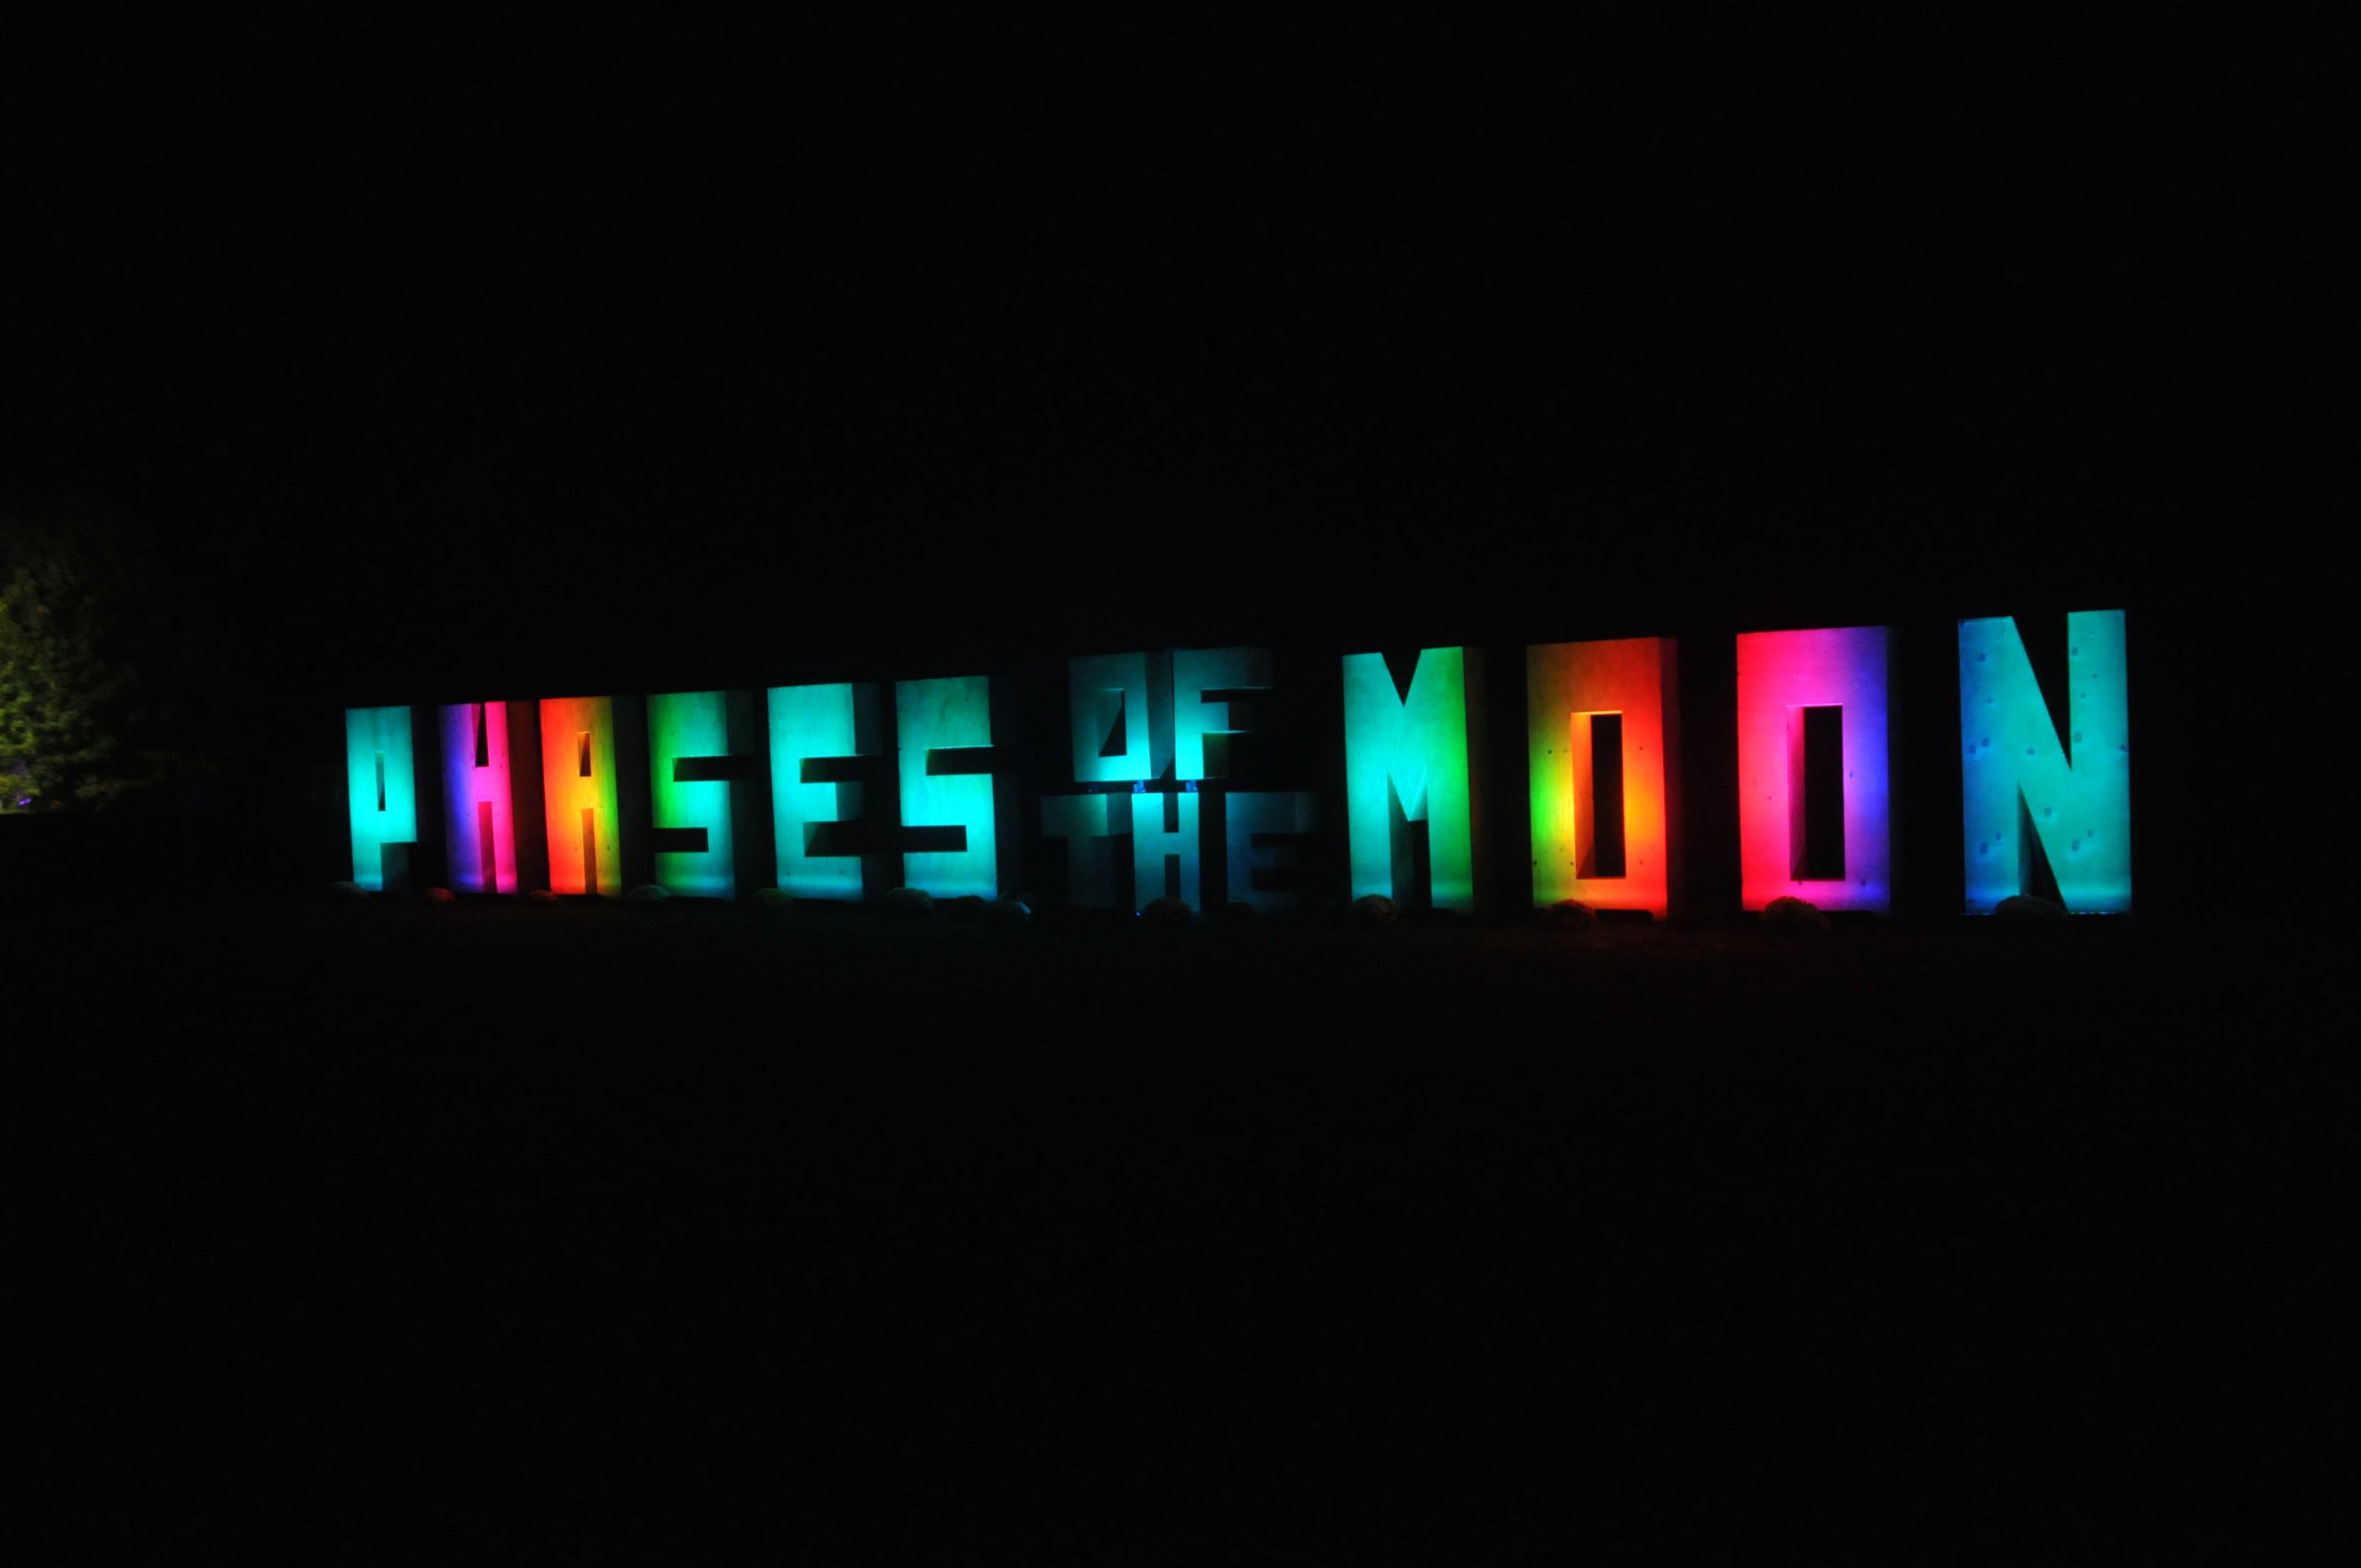 Phases of the Moon Festival 2014 – Review and Photos